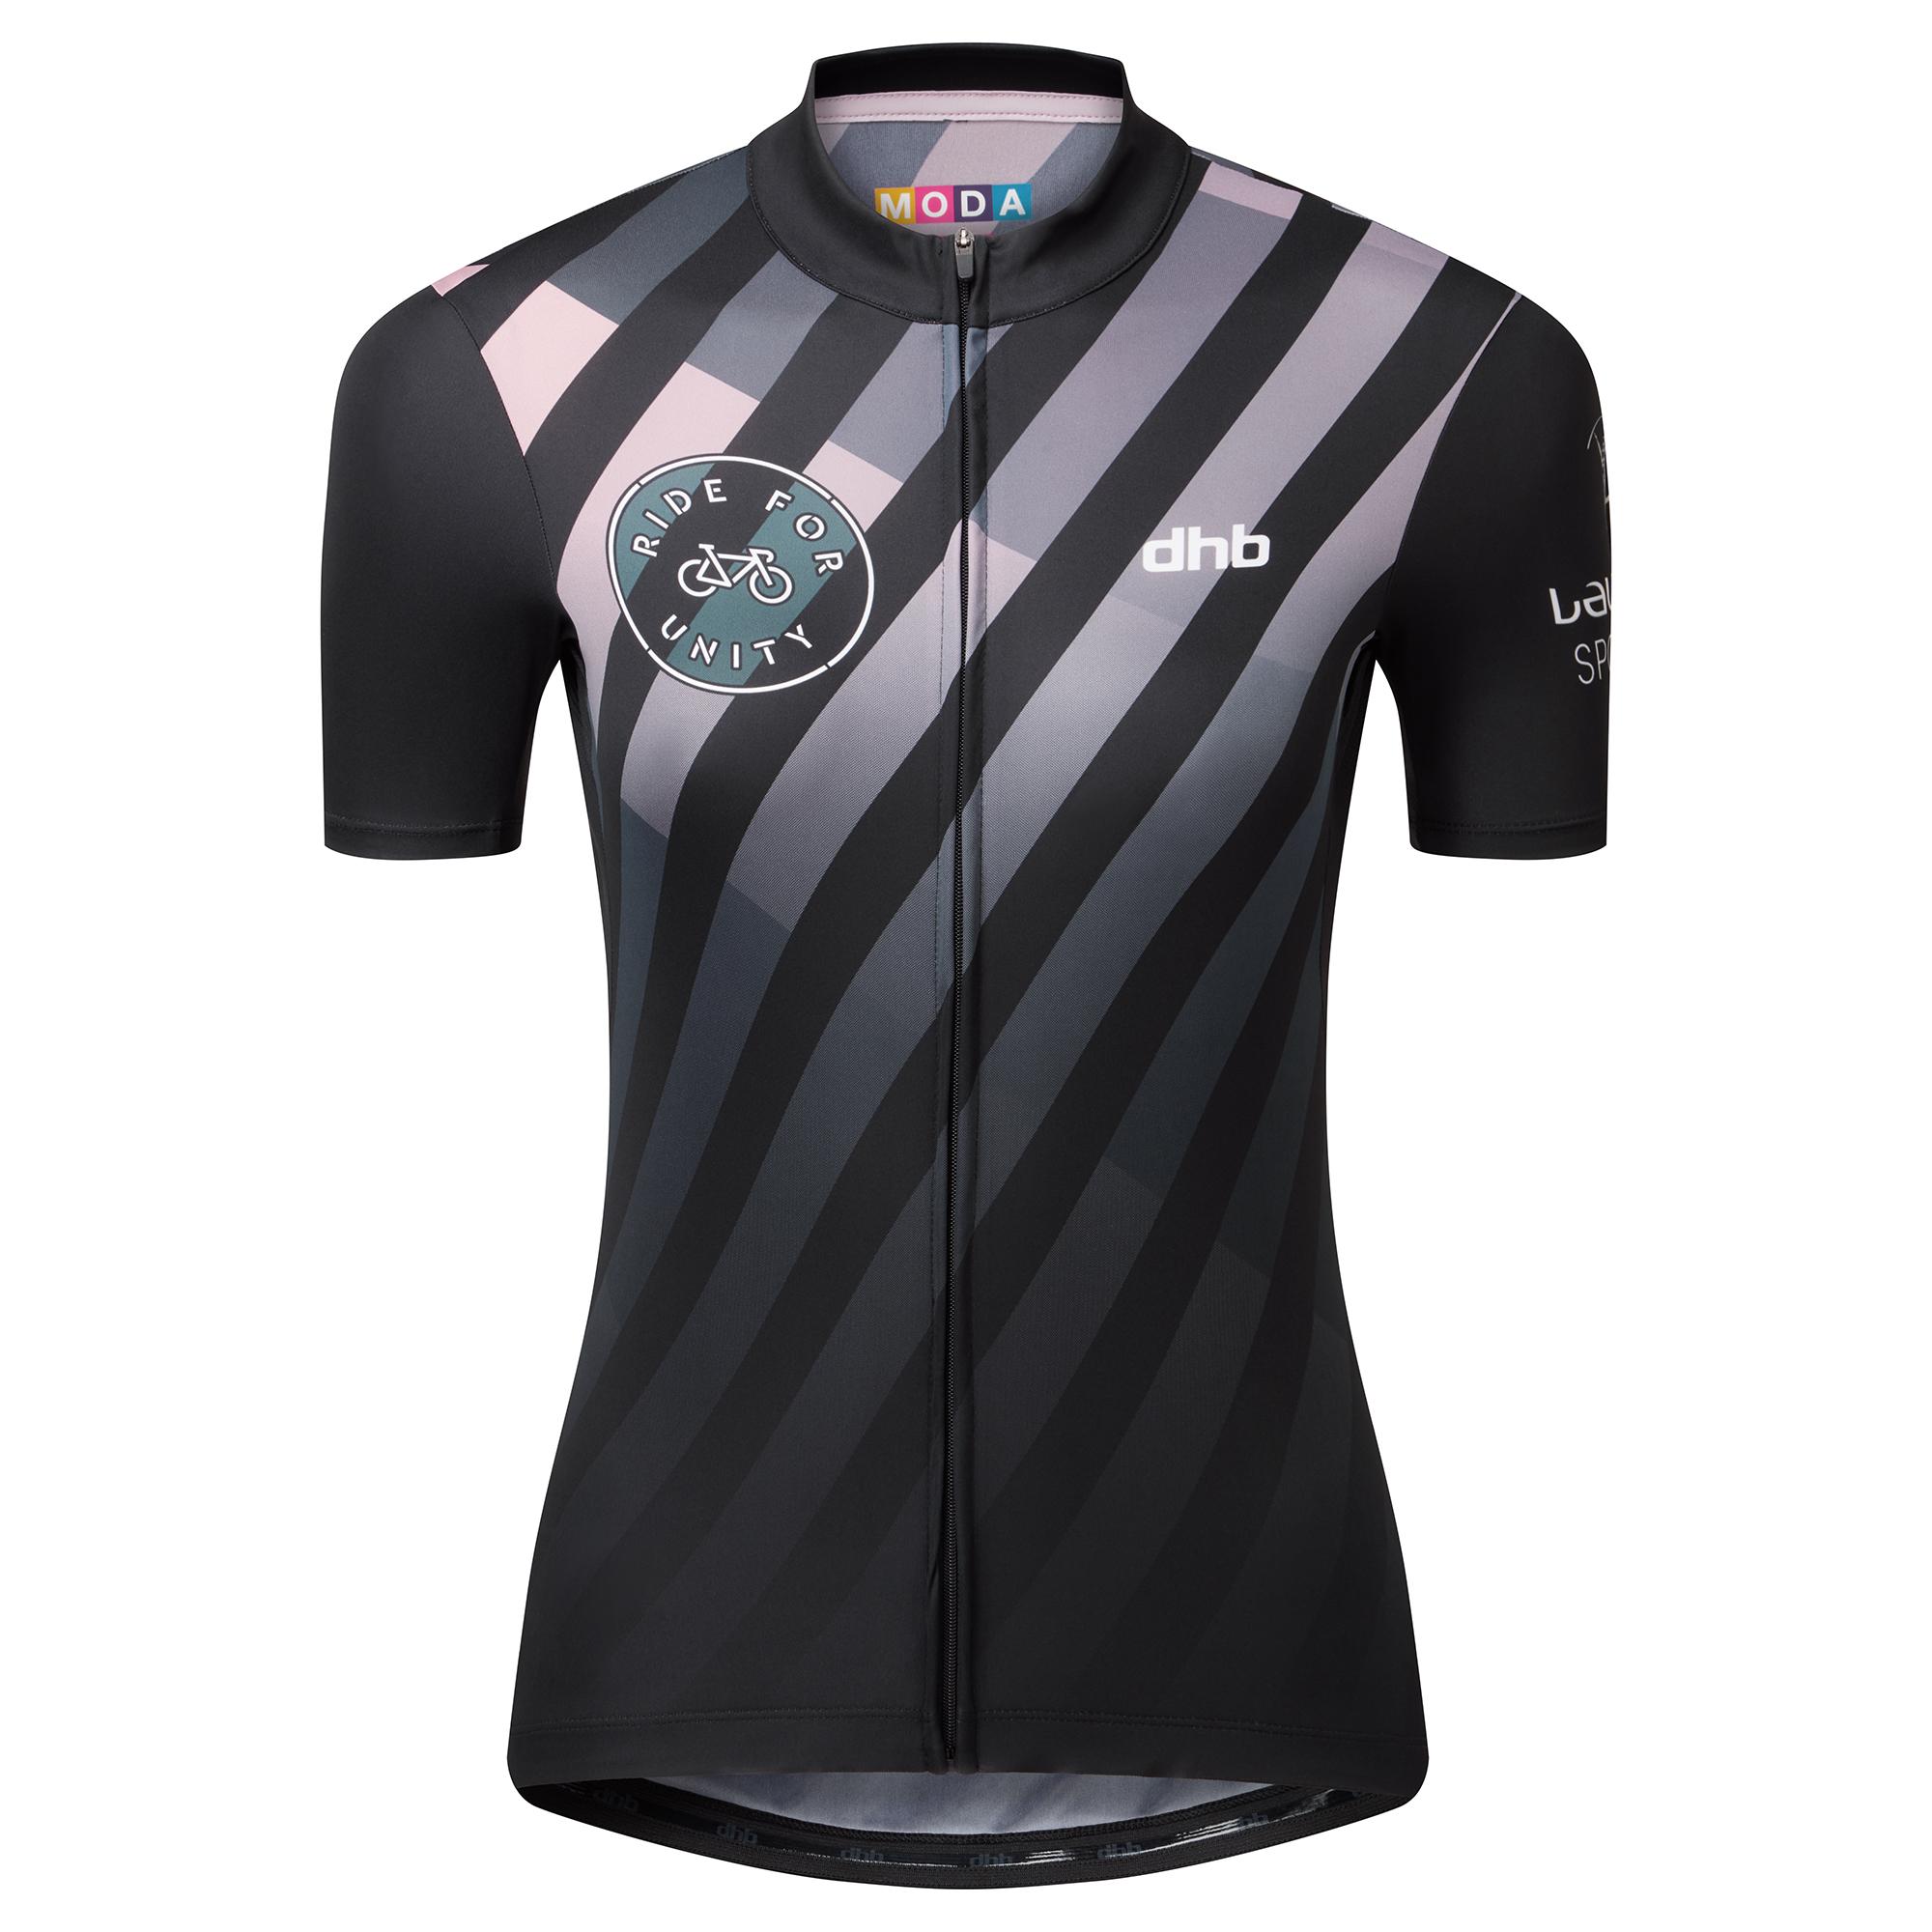 Dhb Ride For Unity Womens Short Sleeve Jersey - Black/pink